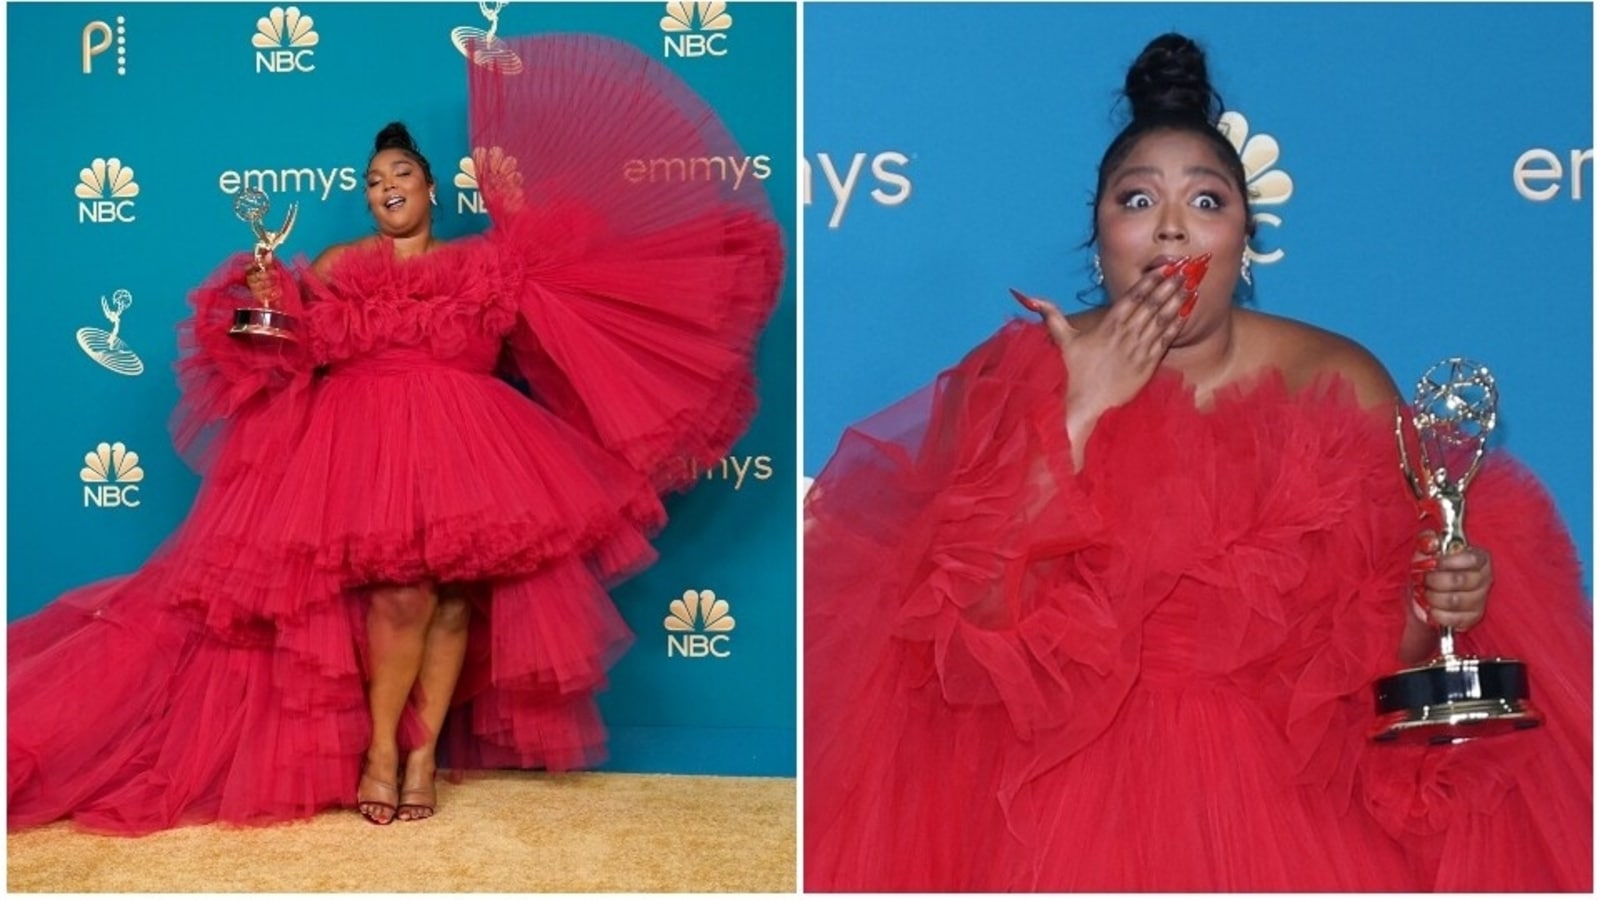 Lizzo wins big at the Emmy Awards 2022 in a jaw-dropping red-hot gown ...